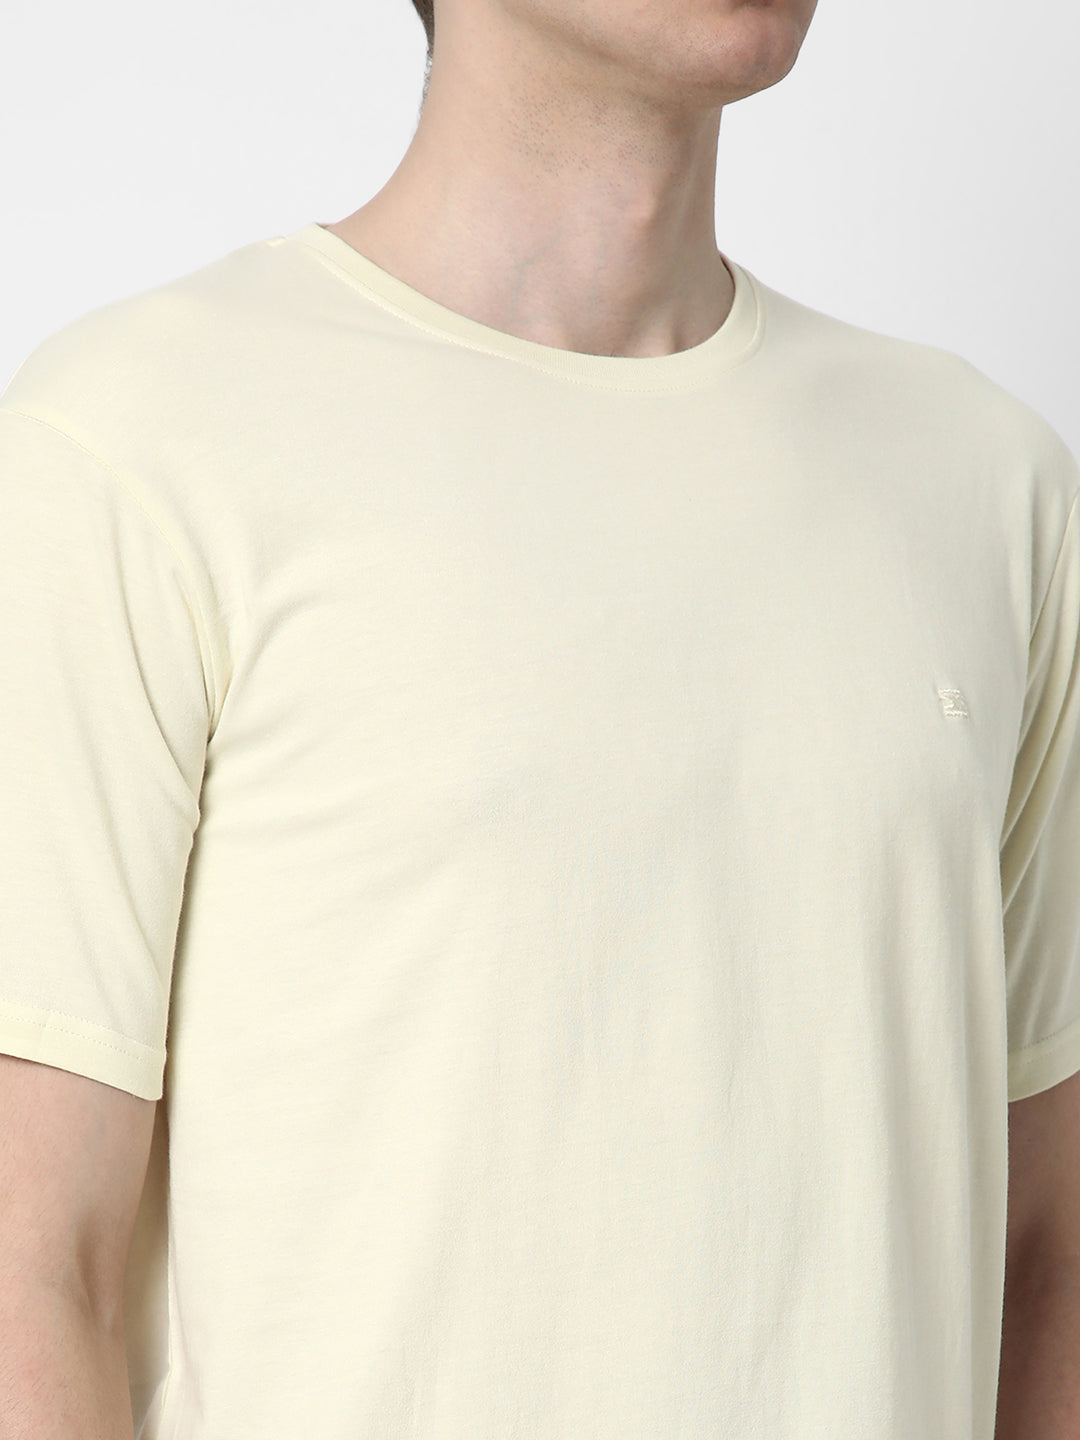 Cotstyle Cotton Fabrics Round Neck Short Length Plain Half Sleeve Casual & Daily Wear Men's T-Shirts -  Pack of 1 - Transparent Yellow